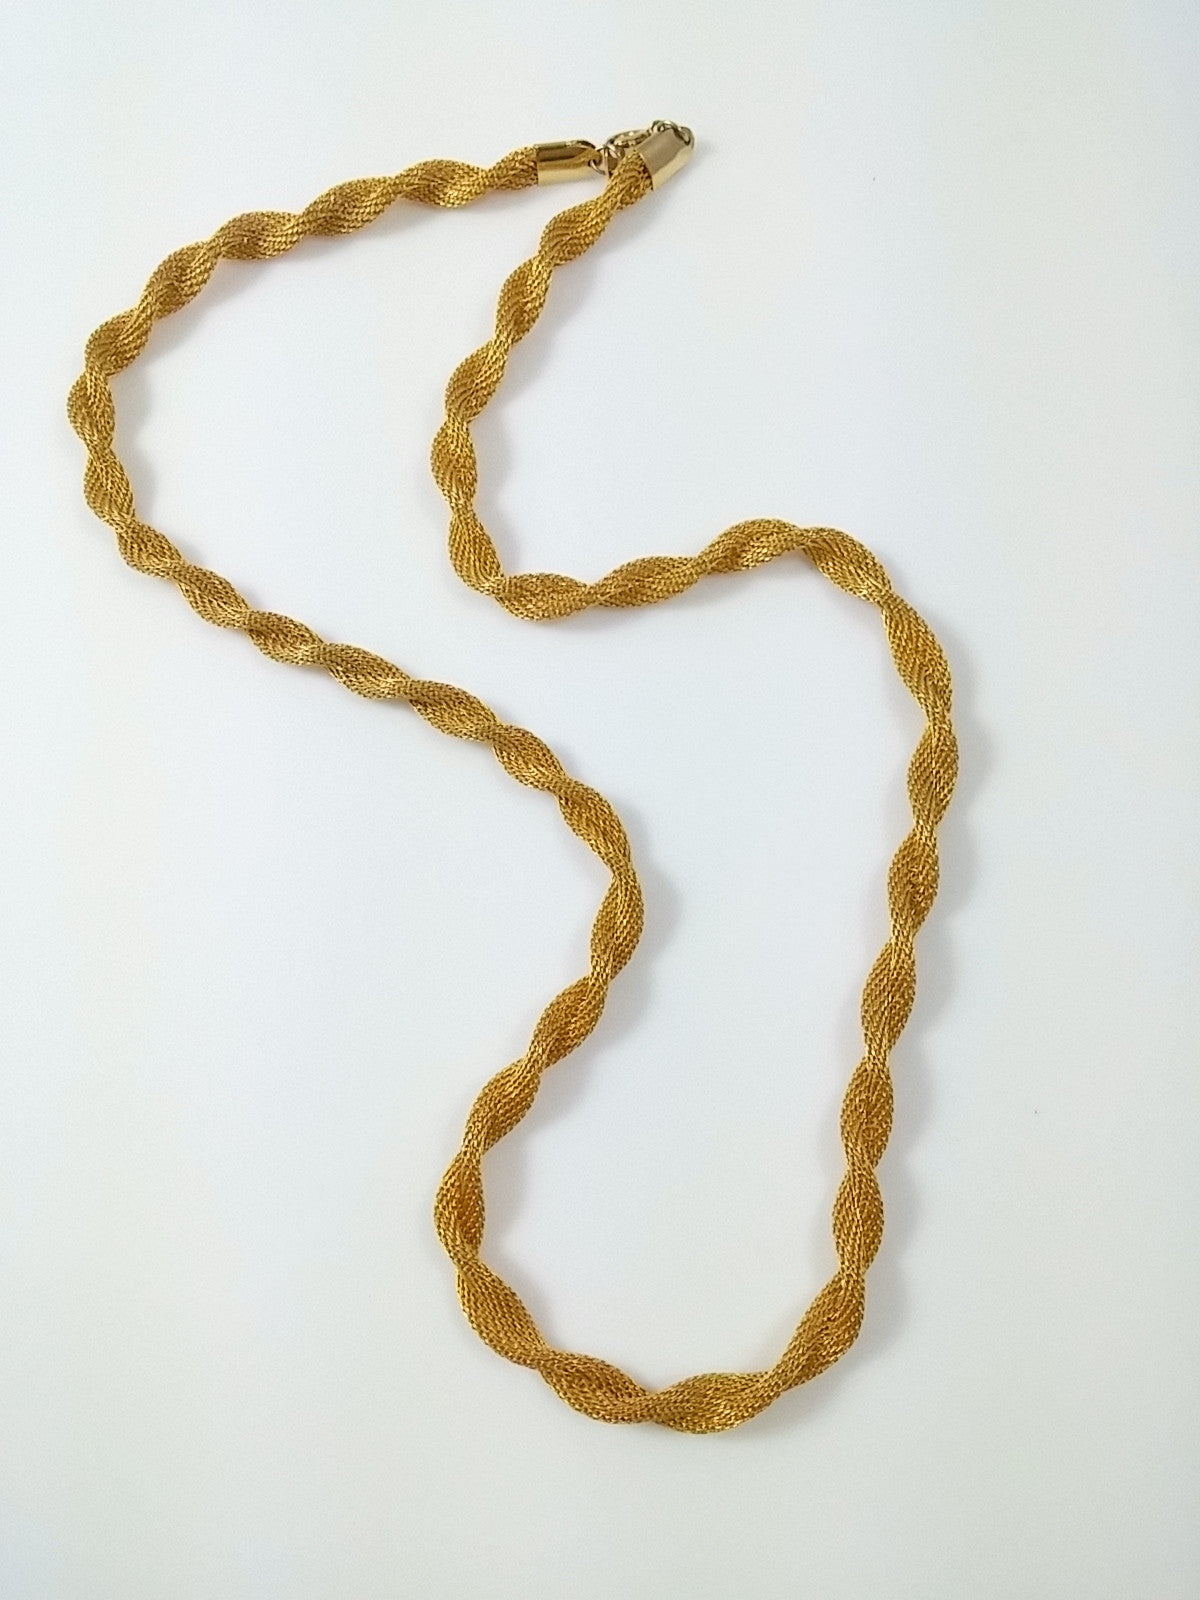 Vintage 70s 24" Necklace Gold Tone Twisted Mesh - Dirty 30 Vintage | Vintage Clothing, Vintage Jewelry, Vintage Accessories